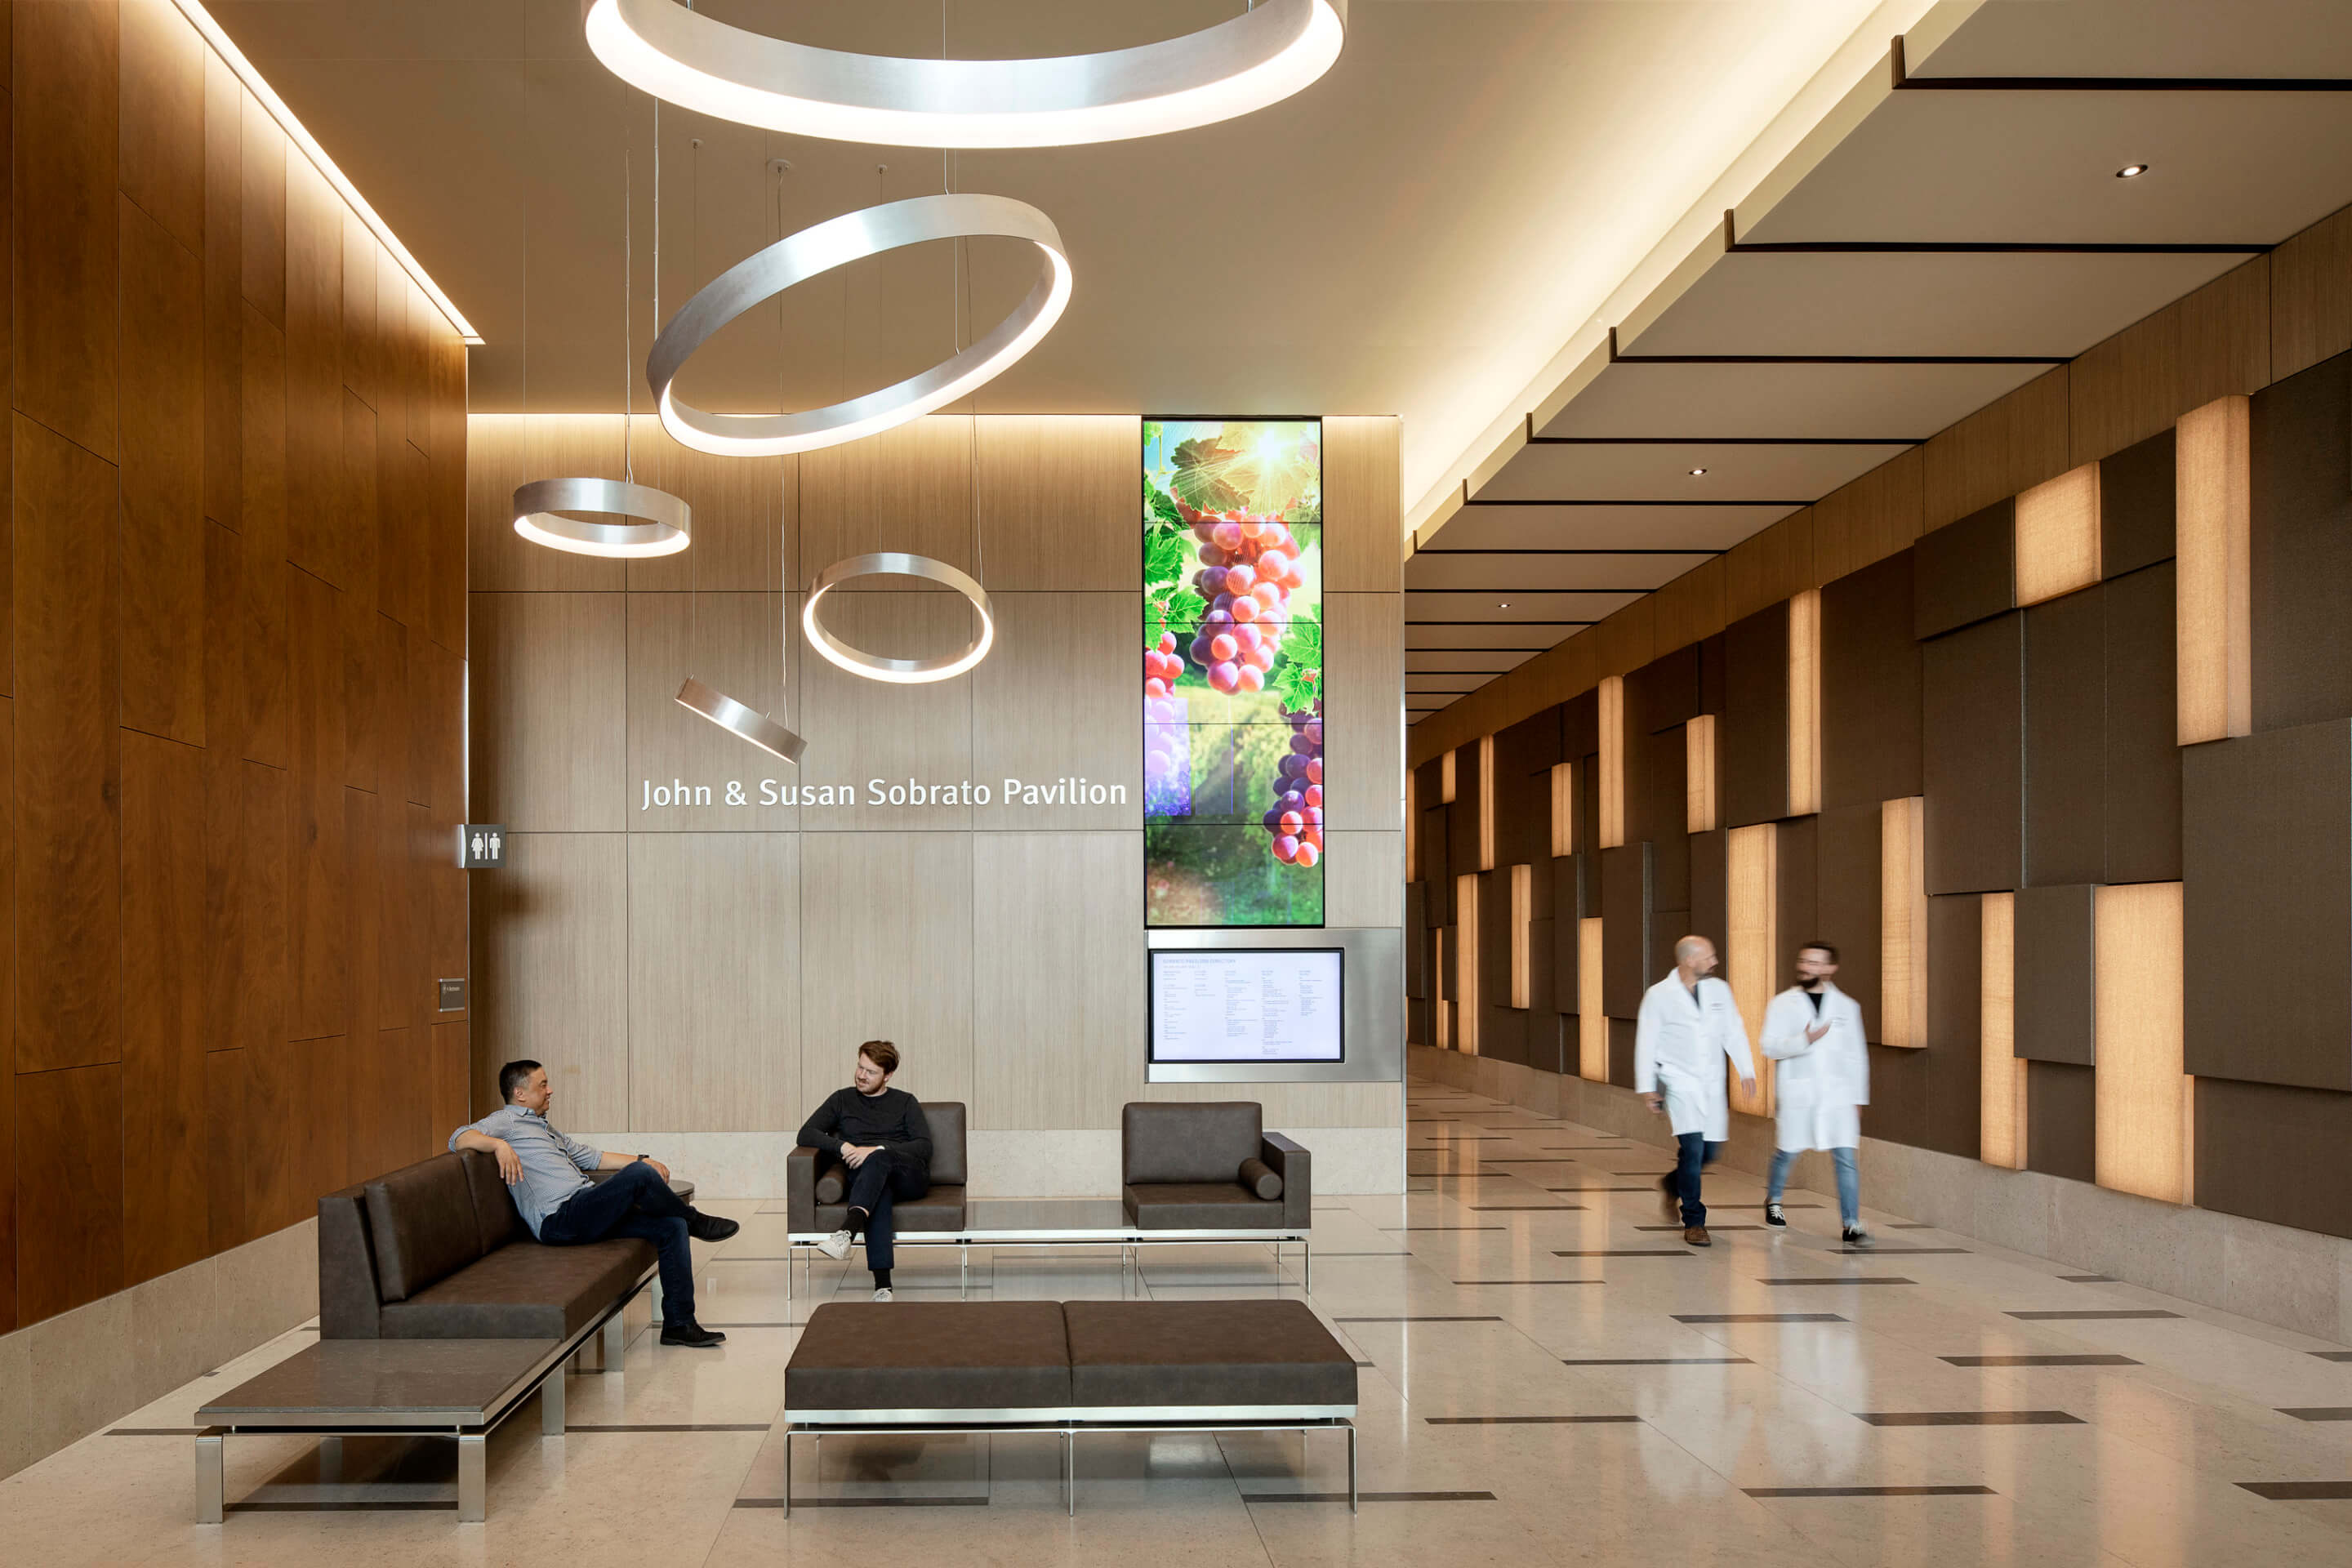 Interior of the el camino health lobby with people waiting below tilted circular lights and wood paneled walls